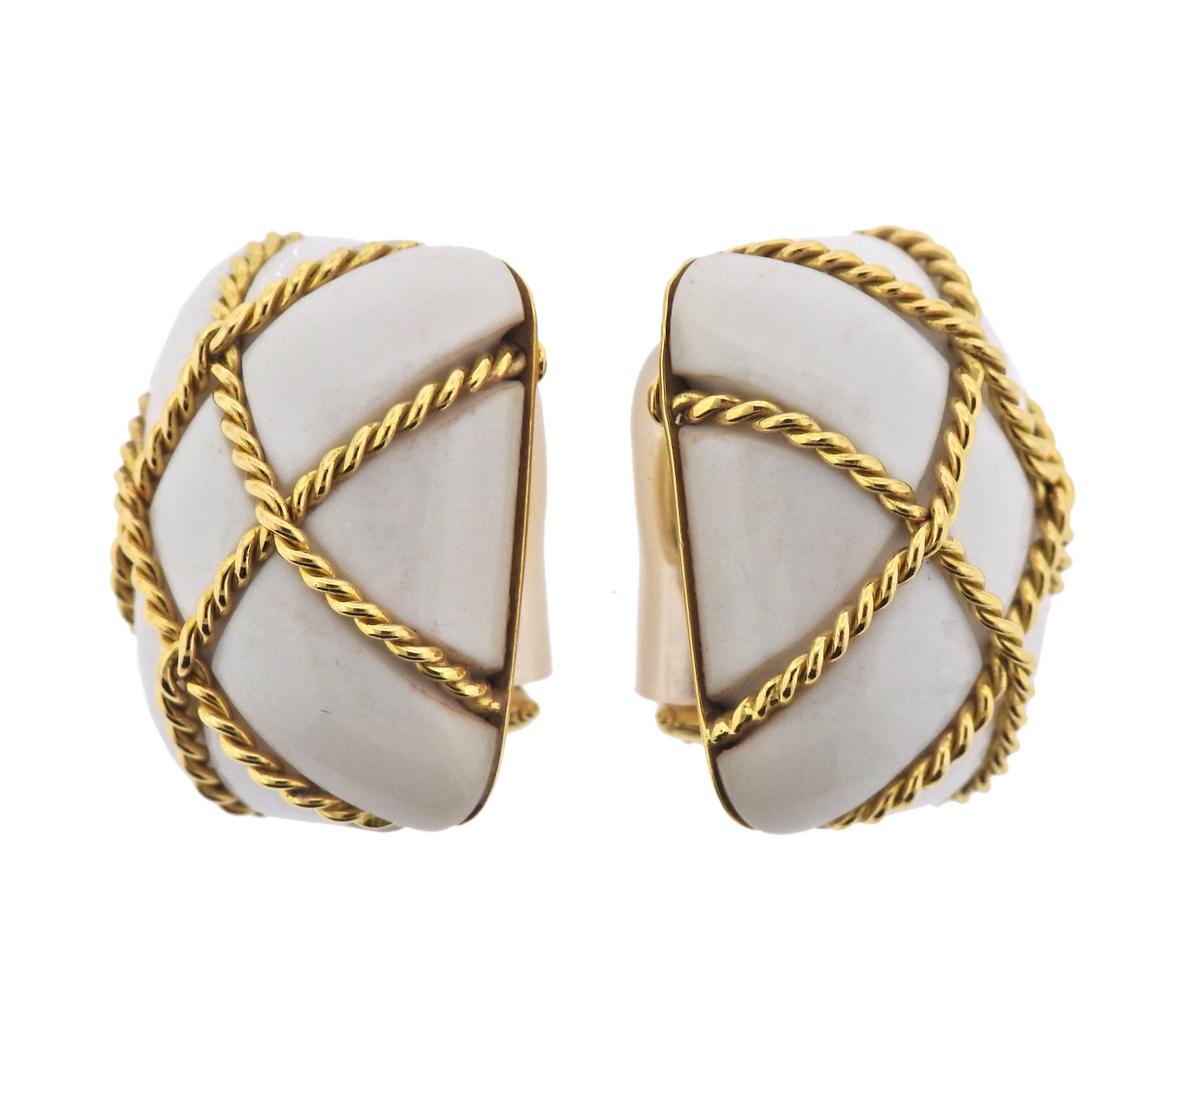  Pair of 18k gold Cage earrings by Seaman Schepps, set with white coral. Come with box. Earrings are 26mm x 20mm, weigh 27.5 grams. Marked: Seaman Schepps, 750, Shell mark, P10895. 